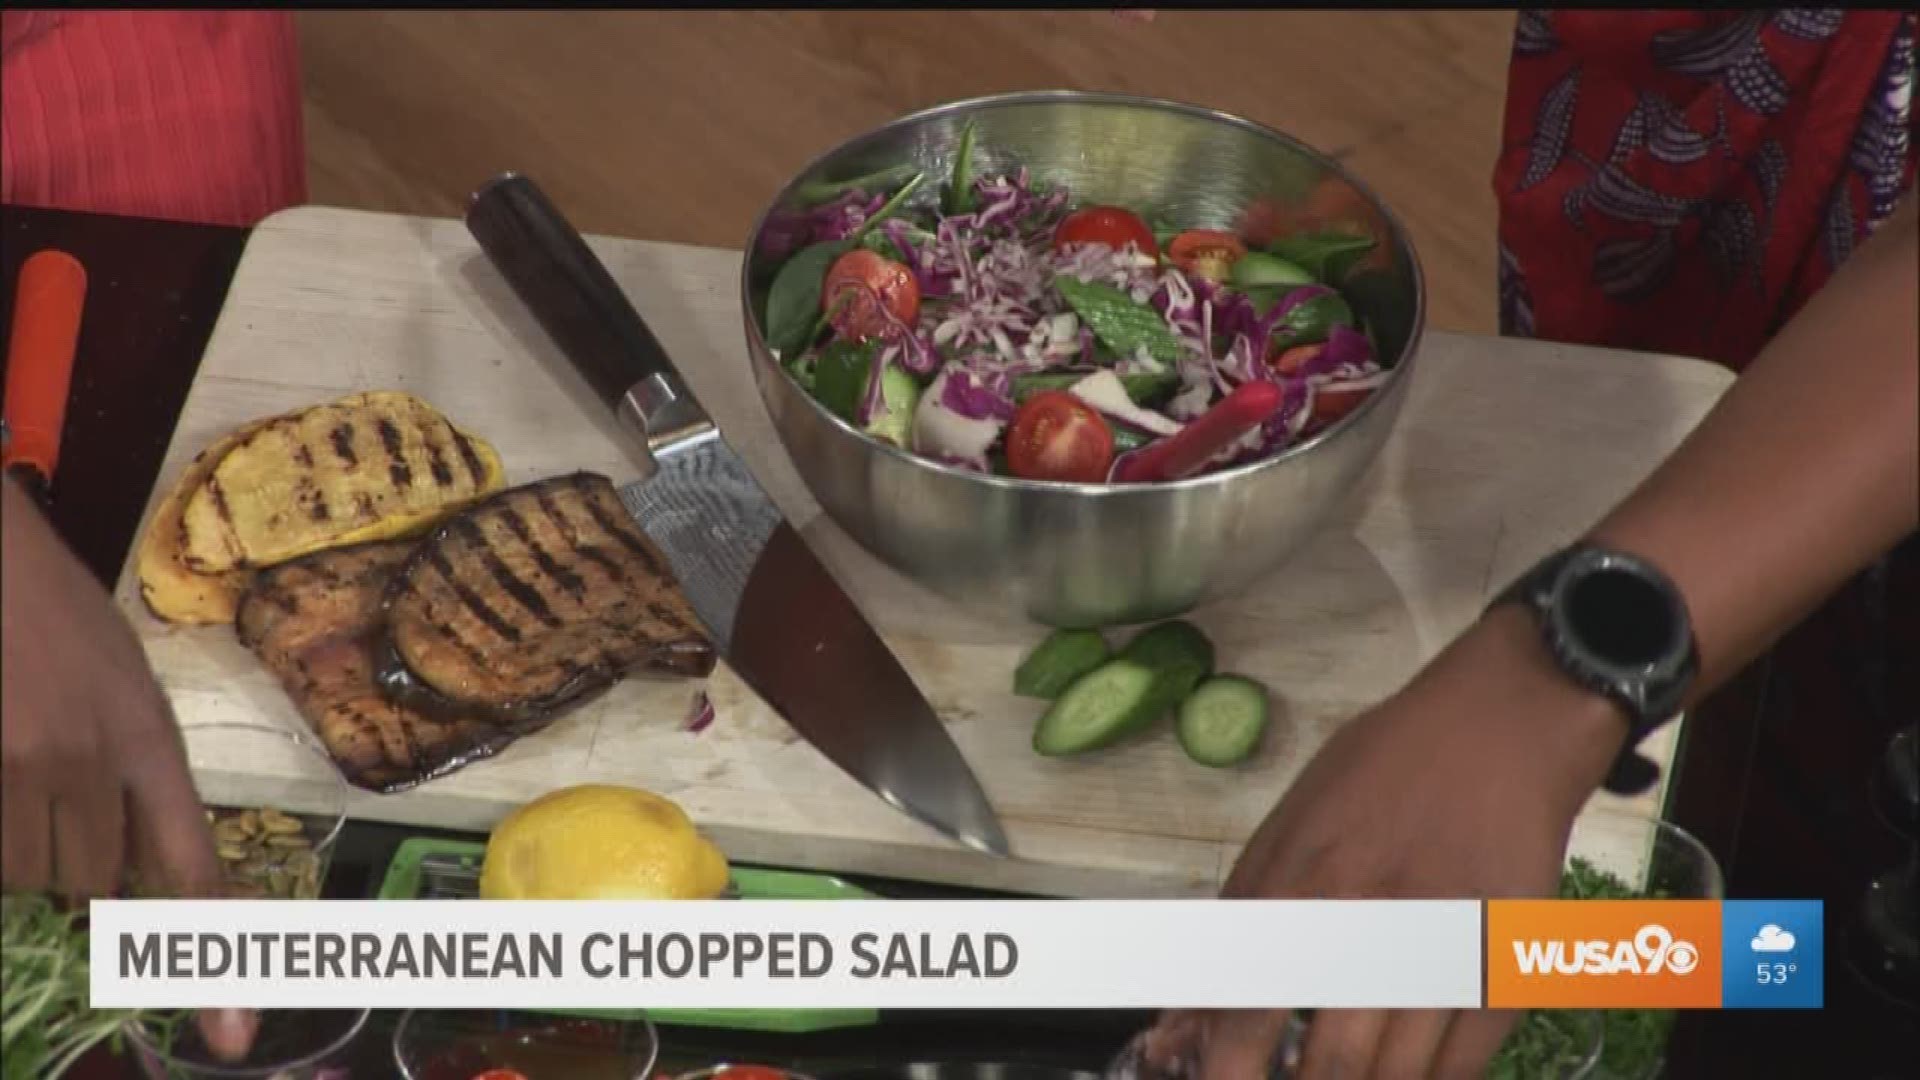 Nutrition expert Jessica "Chef Jess" Swift makes a delicious Mediterranean salad with fresh ingredients that is sure to please all your guests.